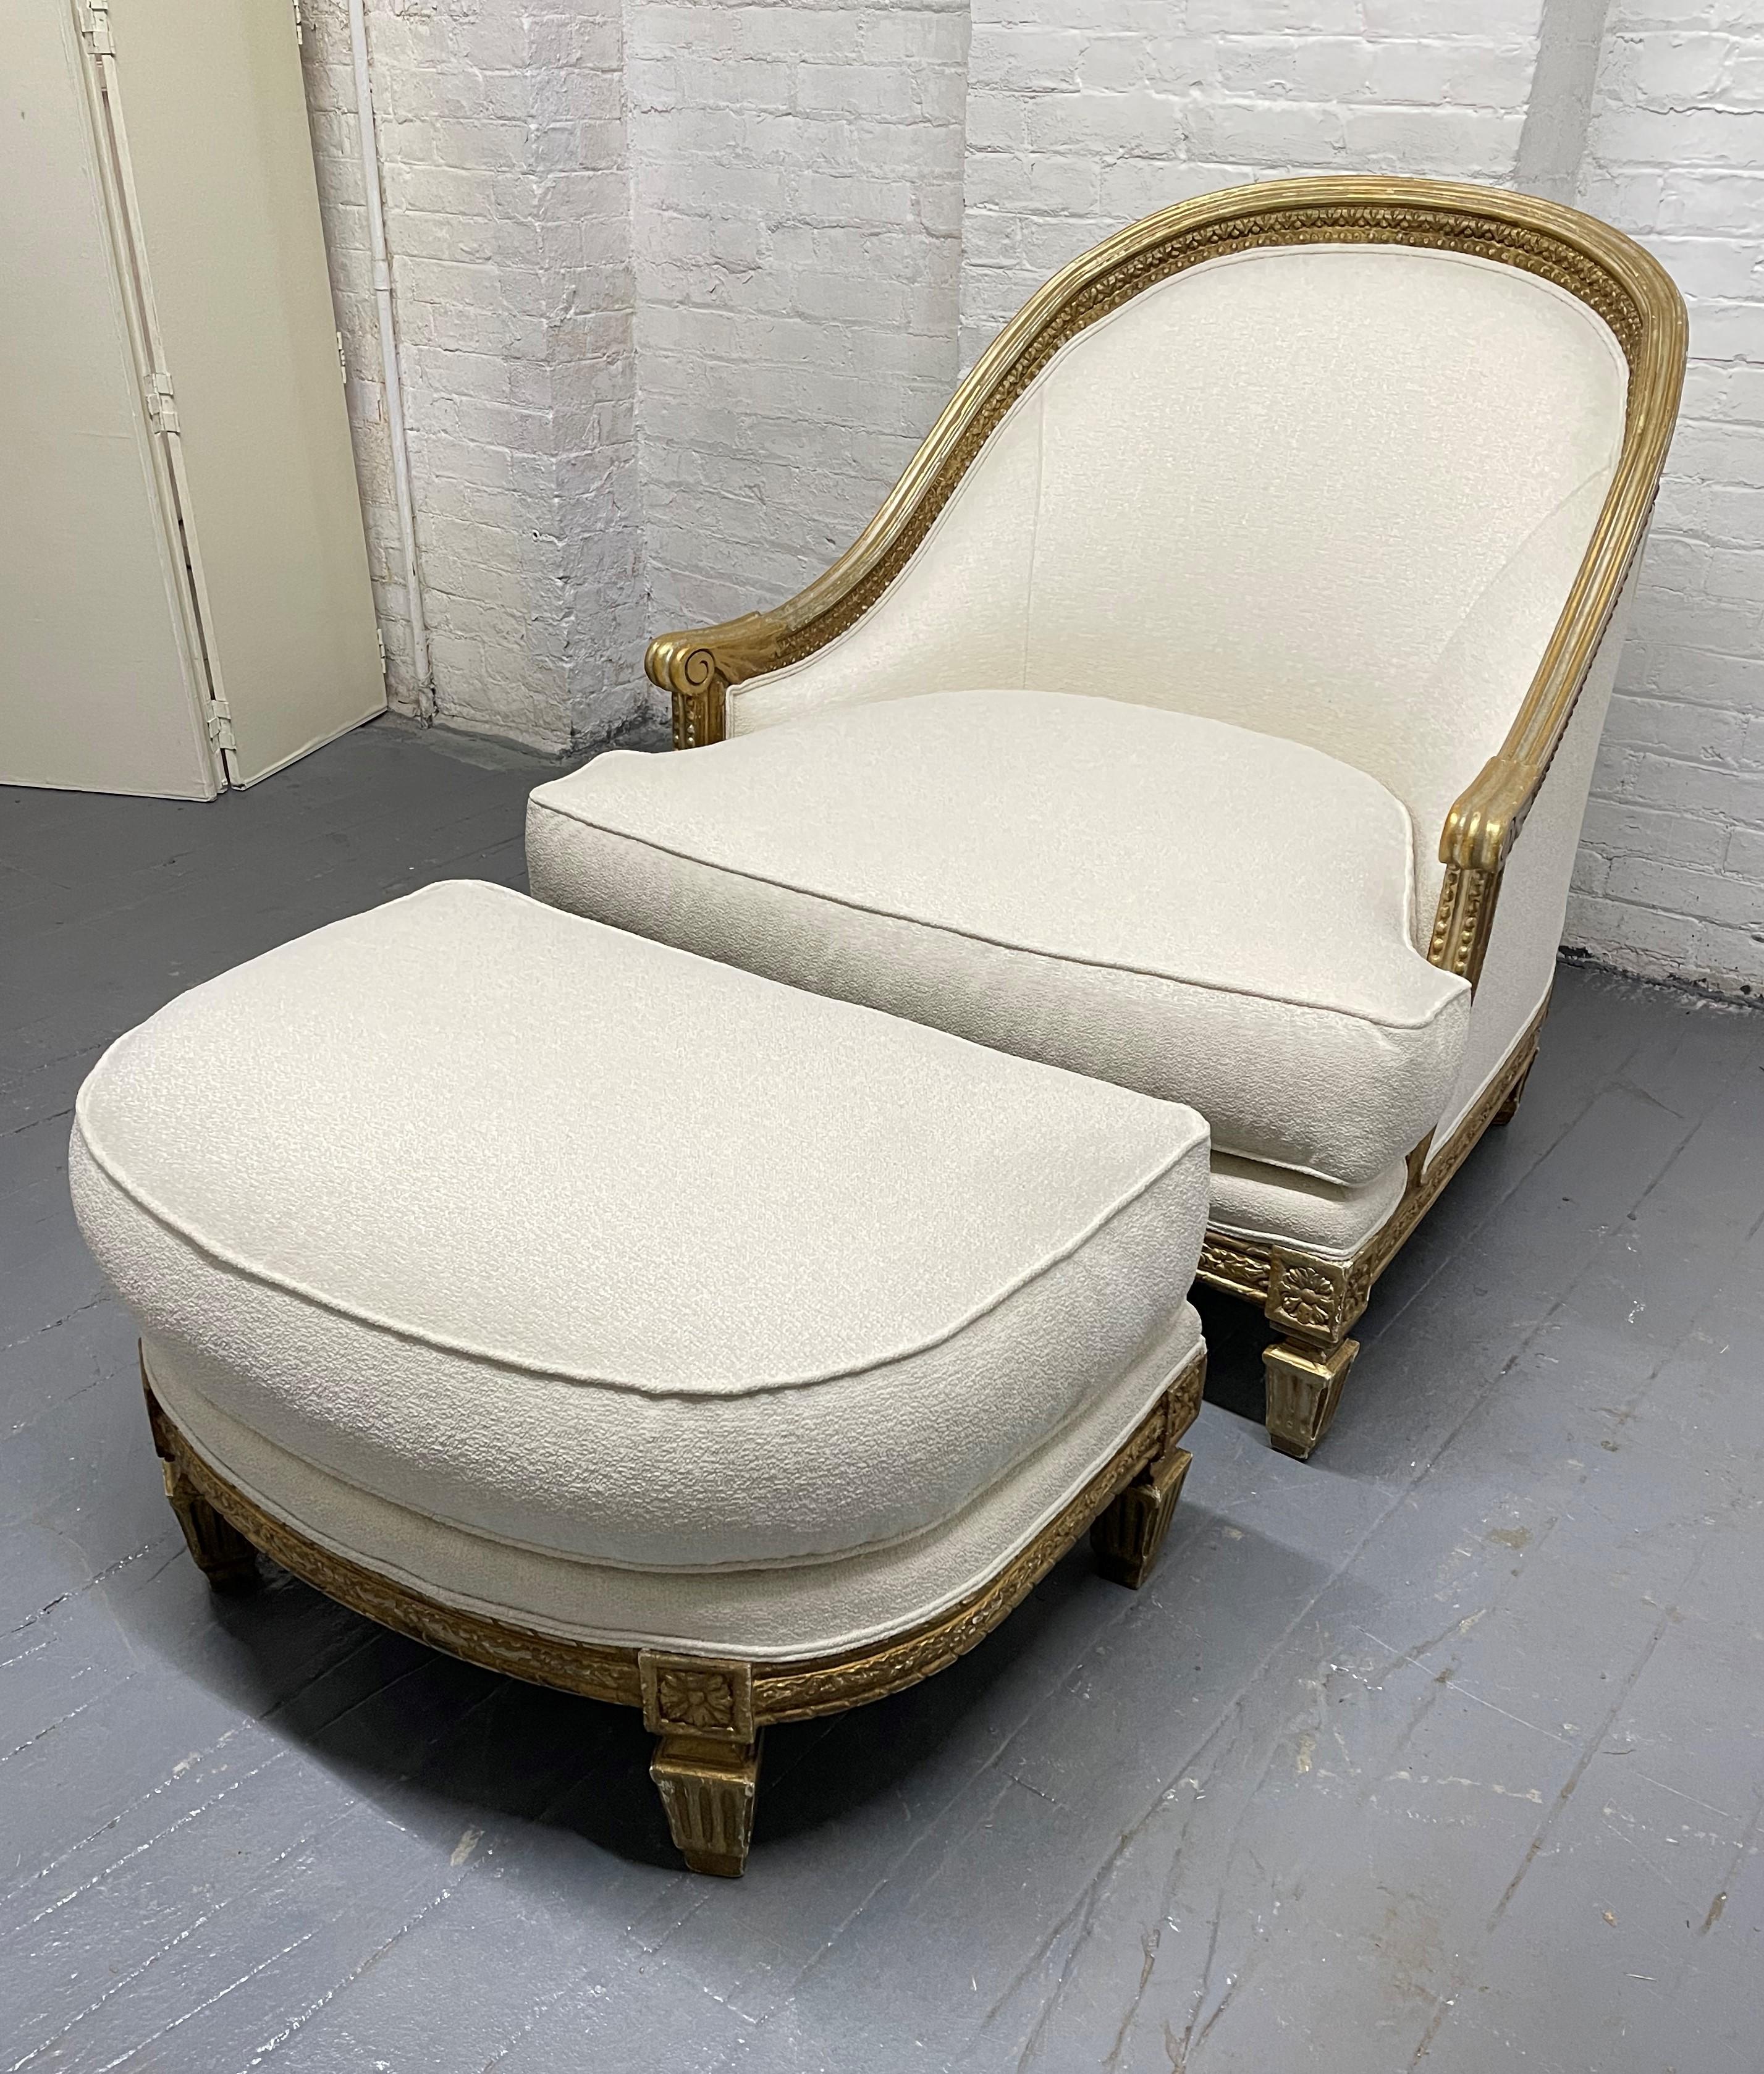 Ralph Lauren antique style lounge chair and ottoman. The frame of the chair and ottoman is giltwood. Chair and ottoman is newly upholstered.
Measures (chair) 37 H x 36 W x 36 D. Seat height: 18
Ottoman: 30.25 W x 18 D 22 D.